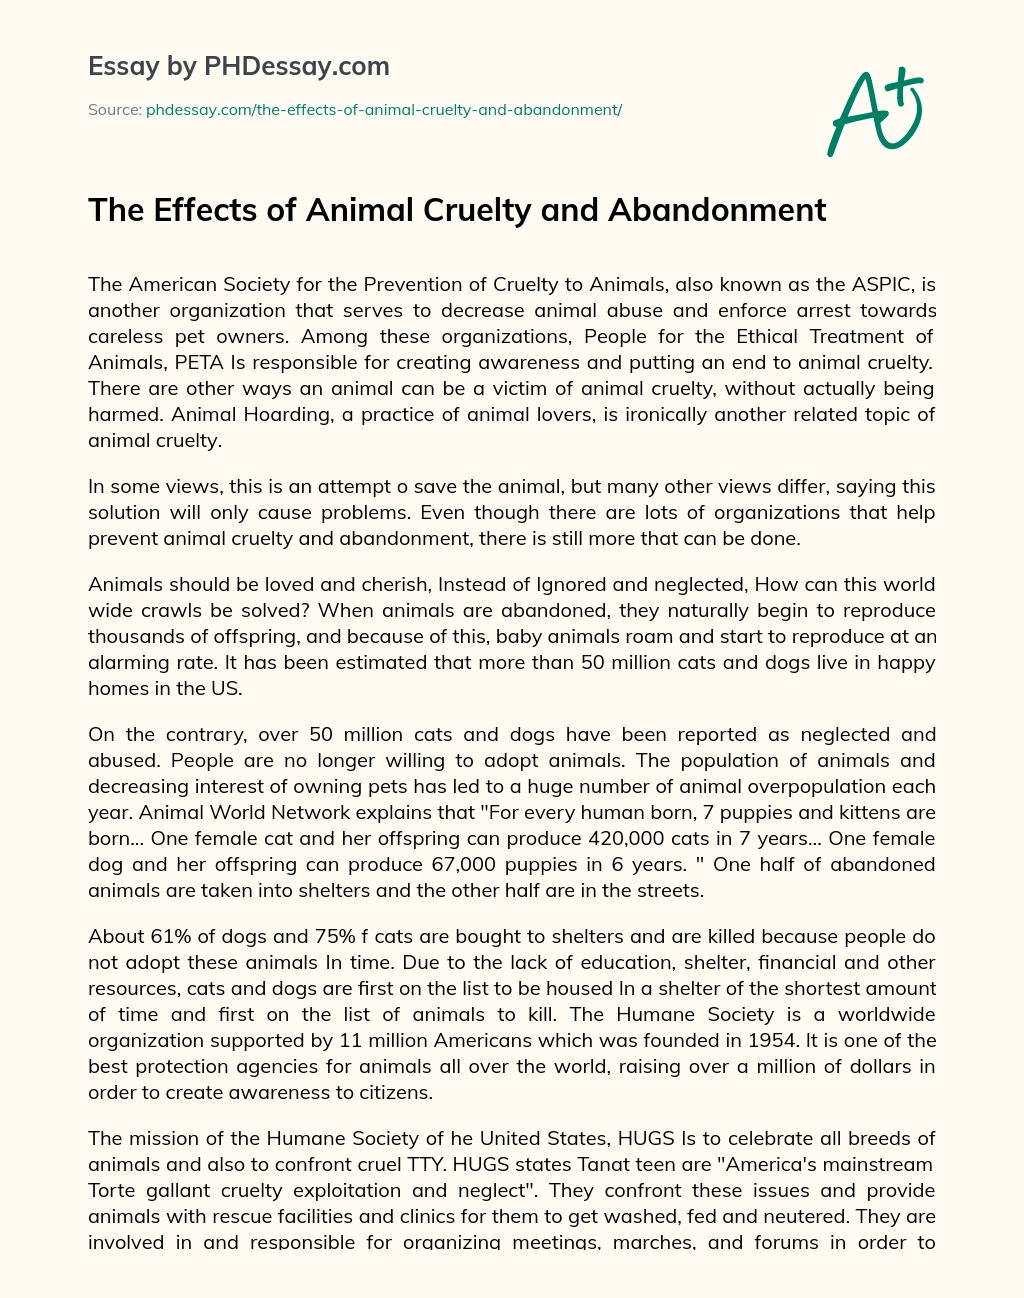 The Effects of Animal Cruelty and Abandonment essay